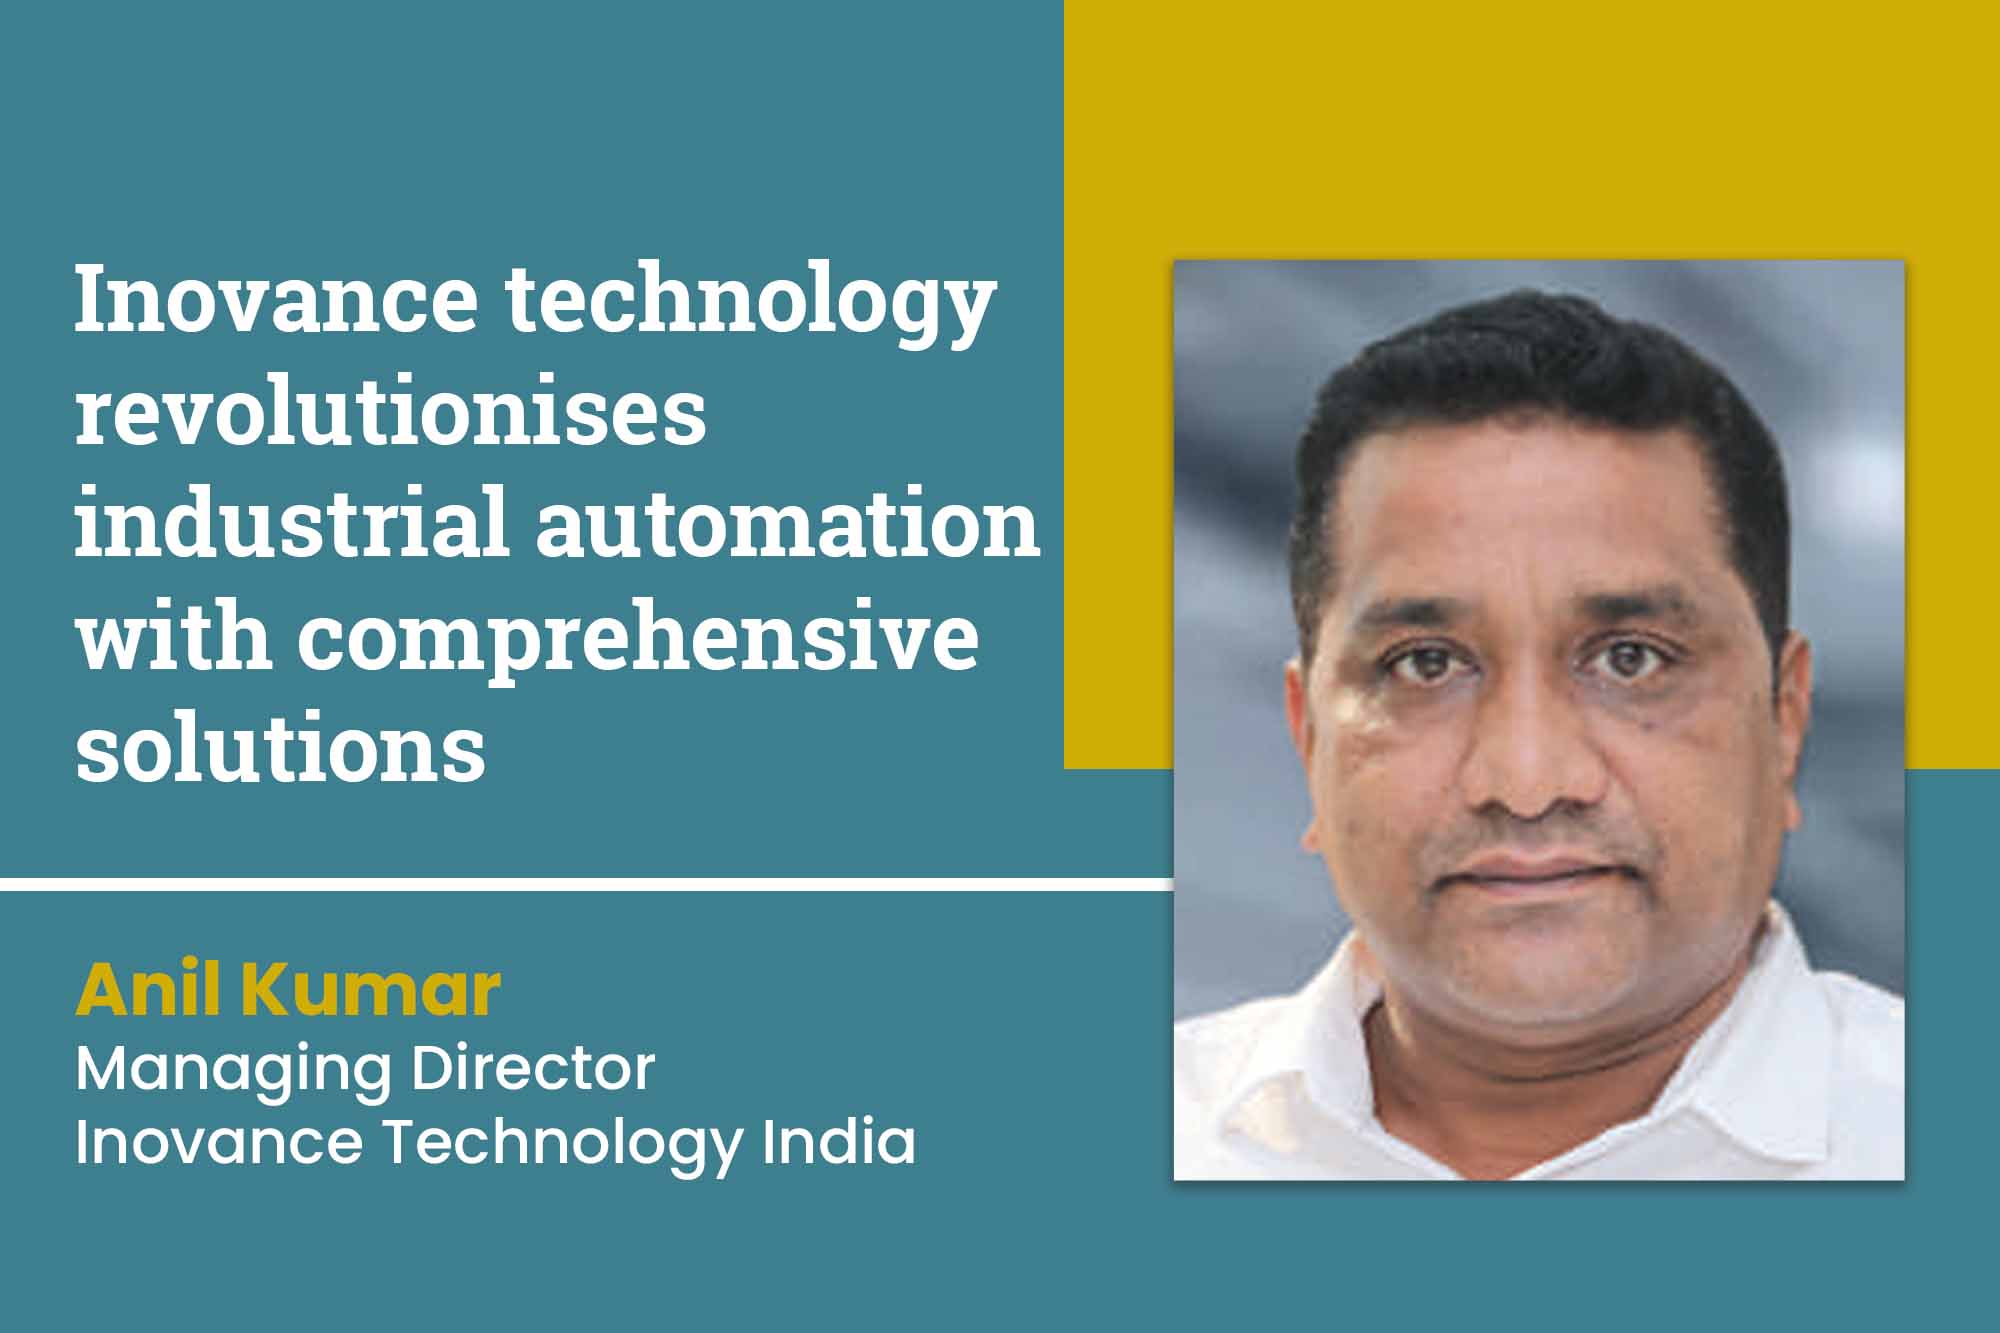 Inovance technology revolutionises industrial automation with comprehensive solutions